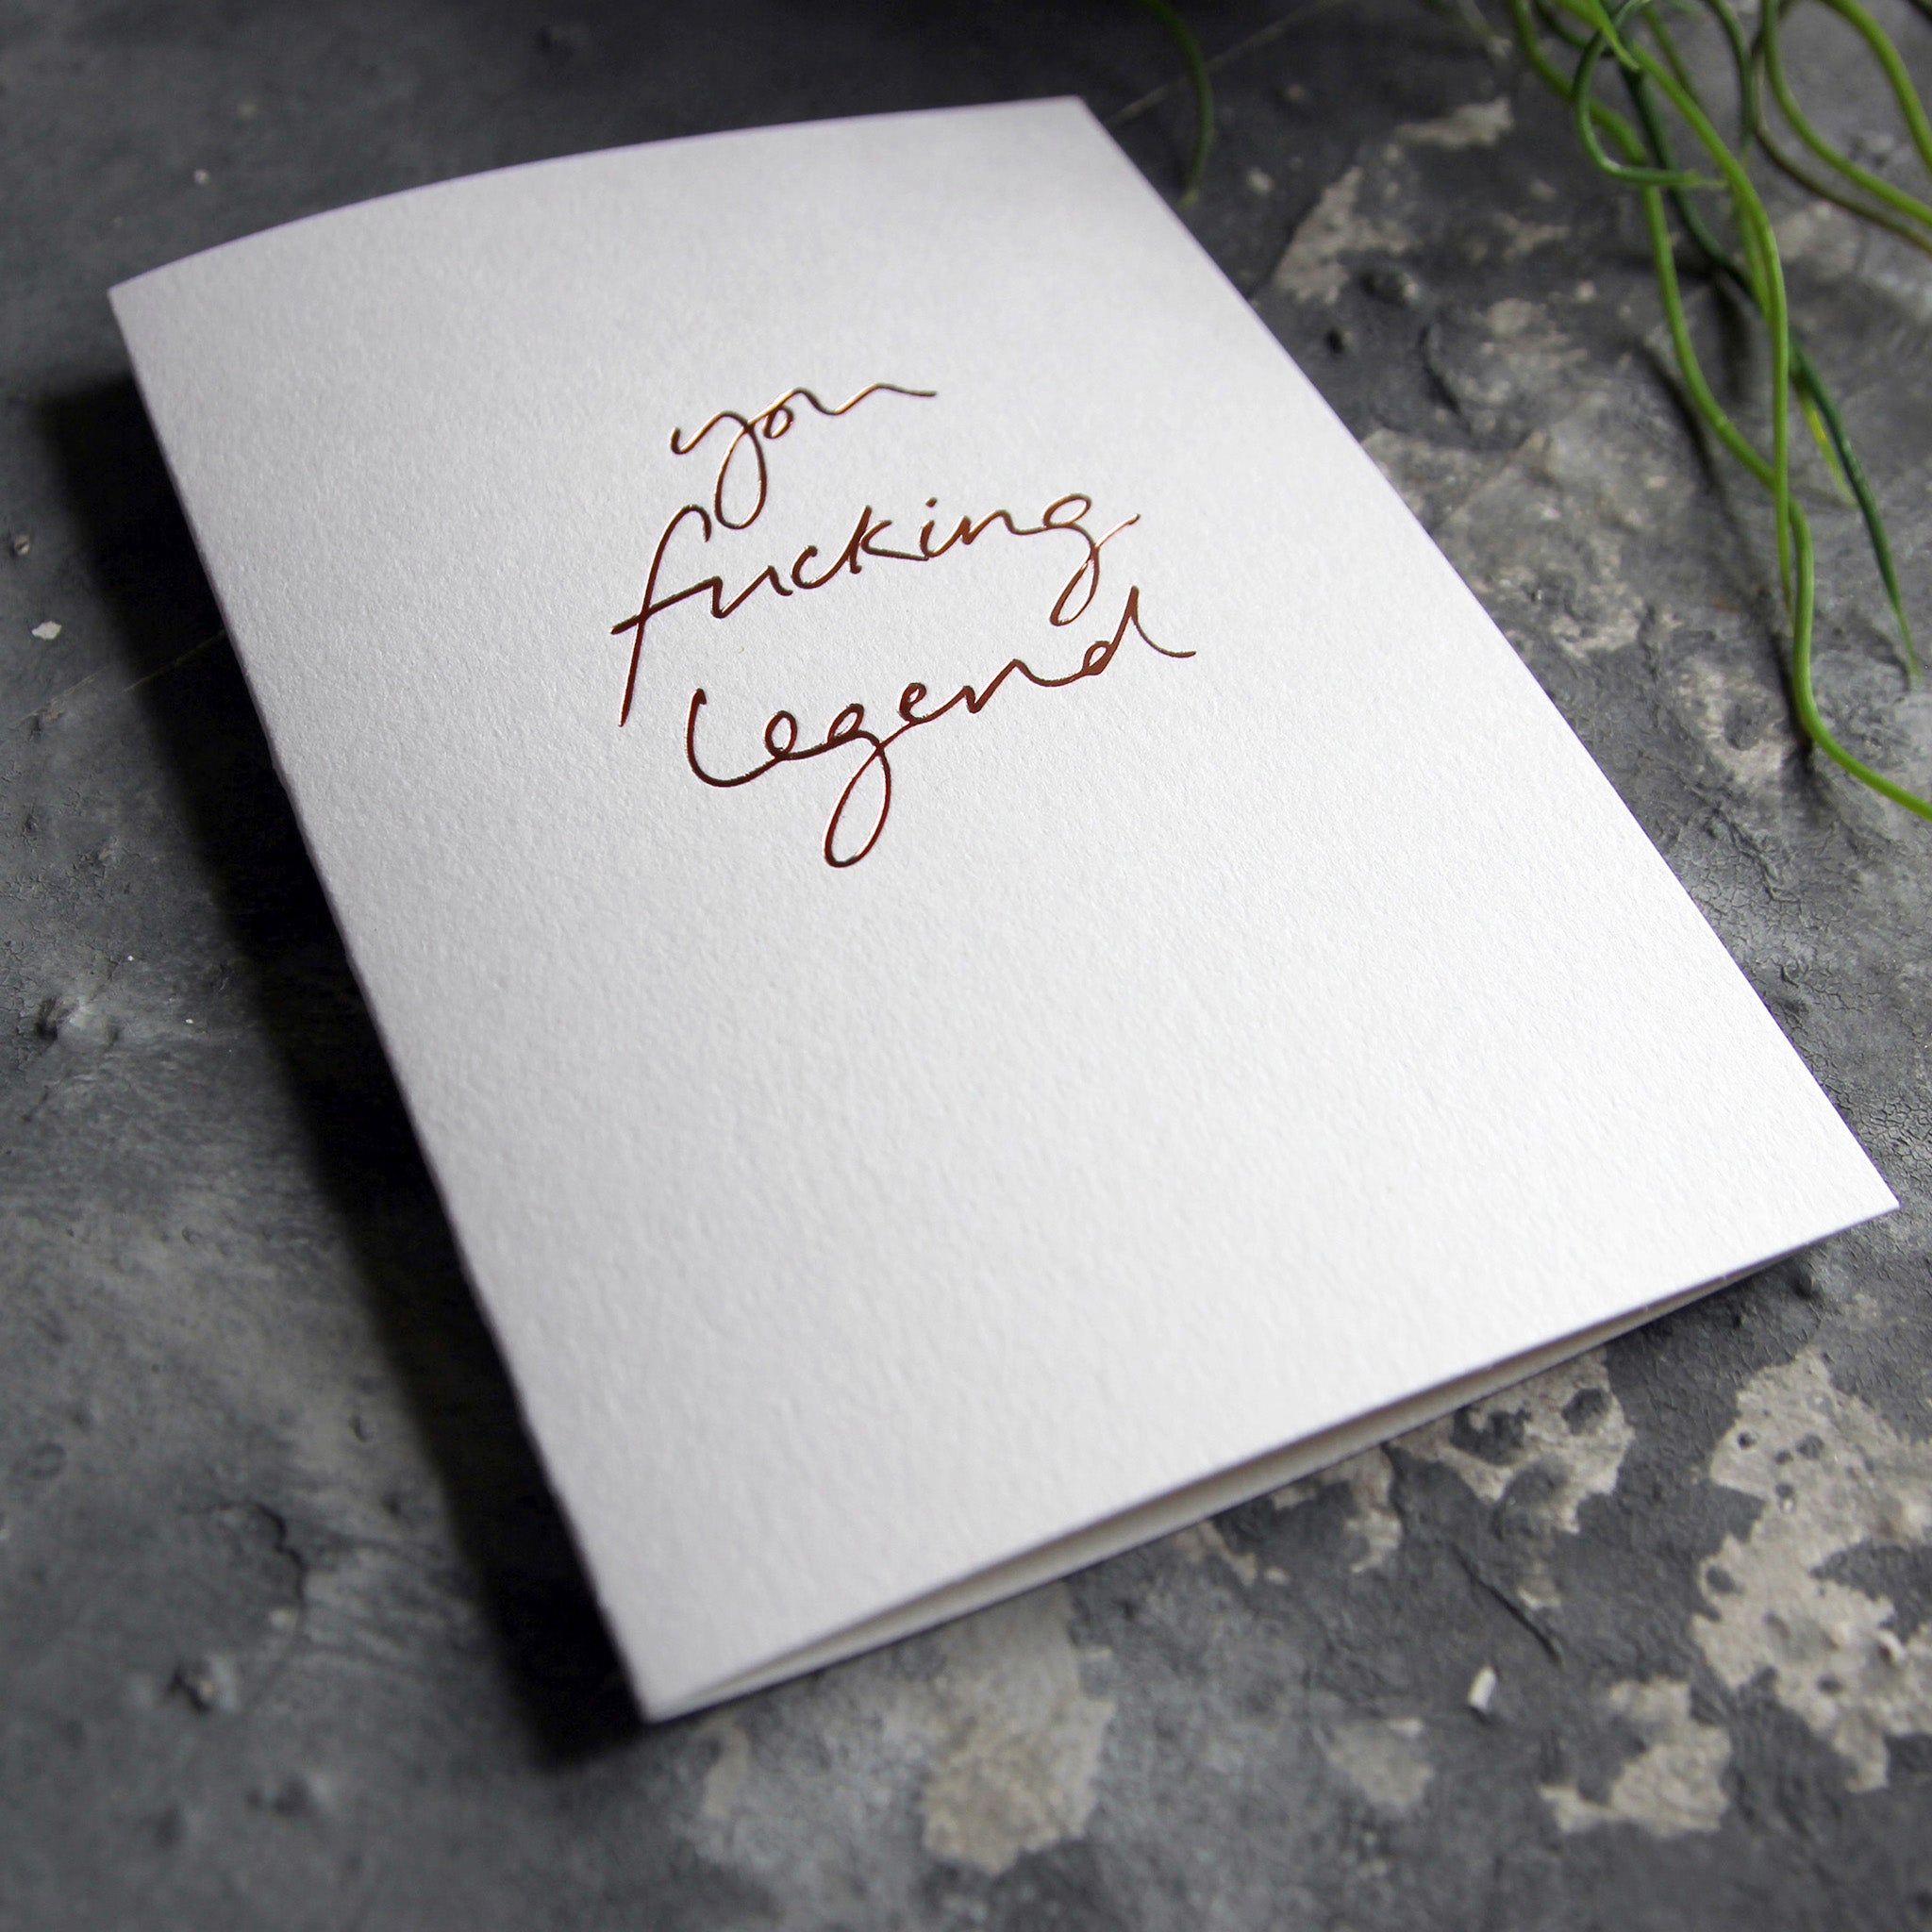 Luxury white greetings card with "You Fucking Legend' handwritten in the front and hand printed in rose gold foil on a grey background with some green plant leaves at the side.